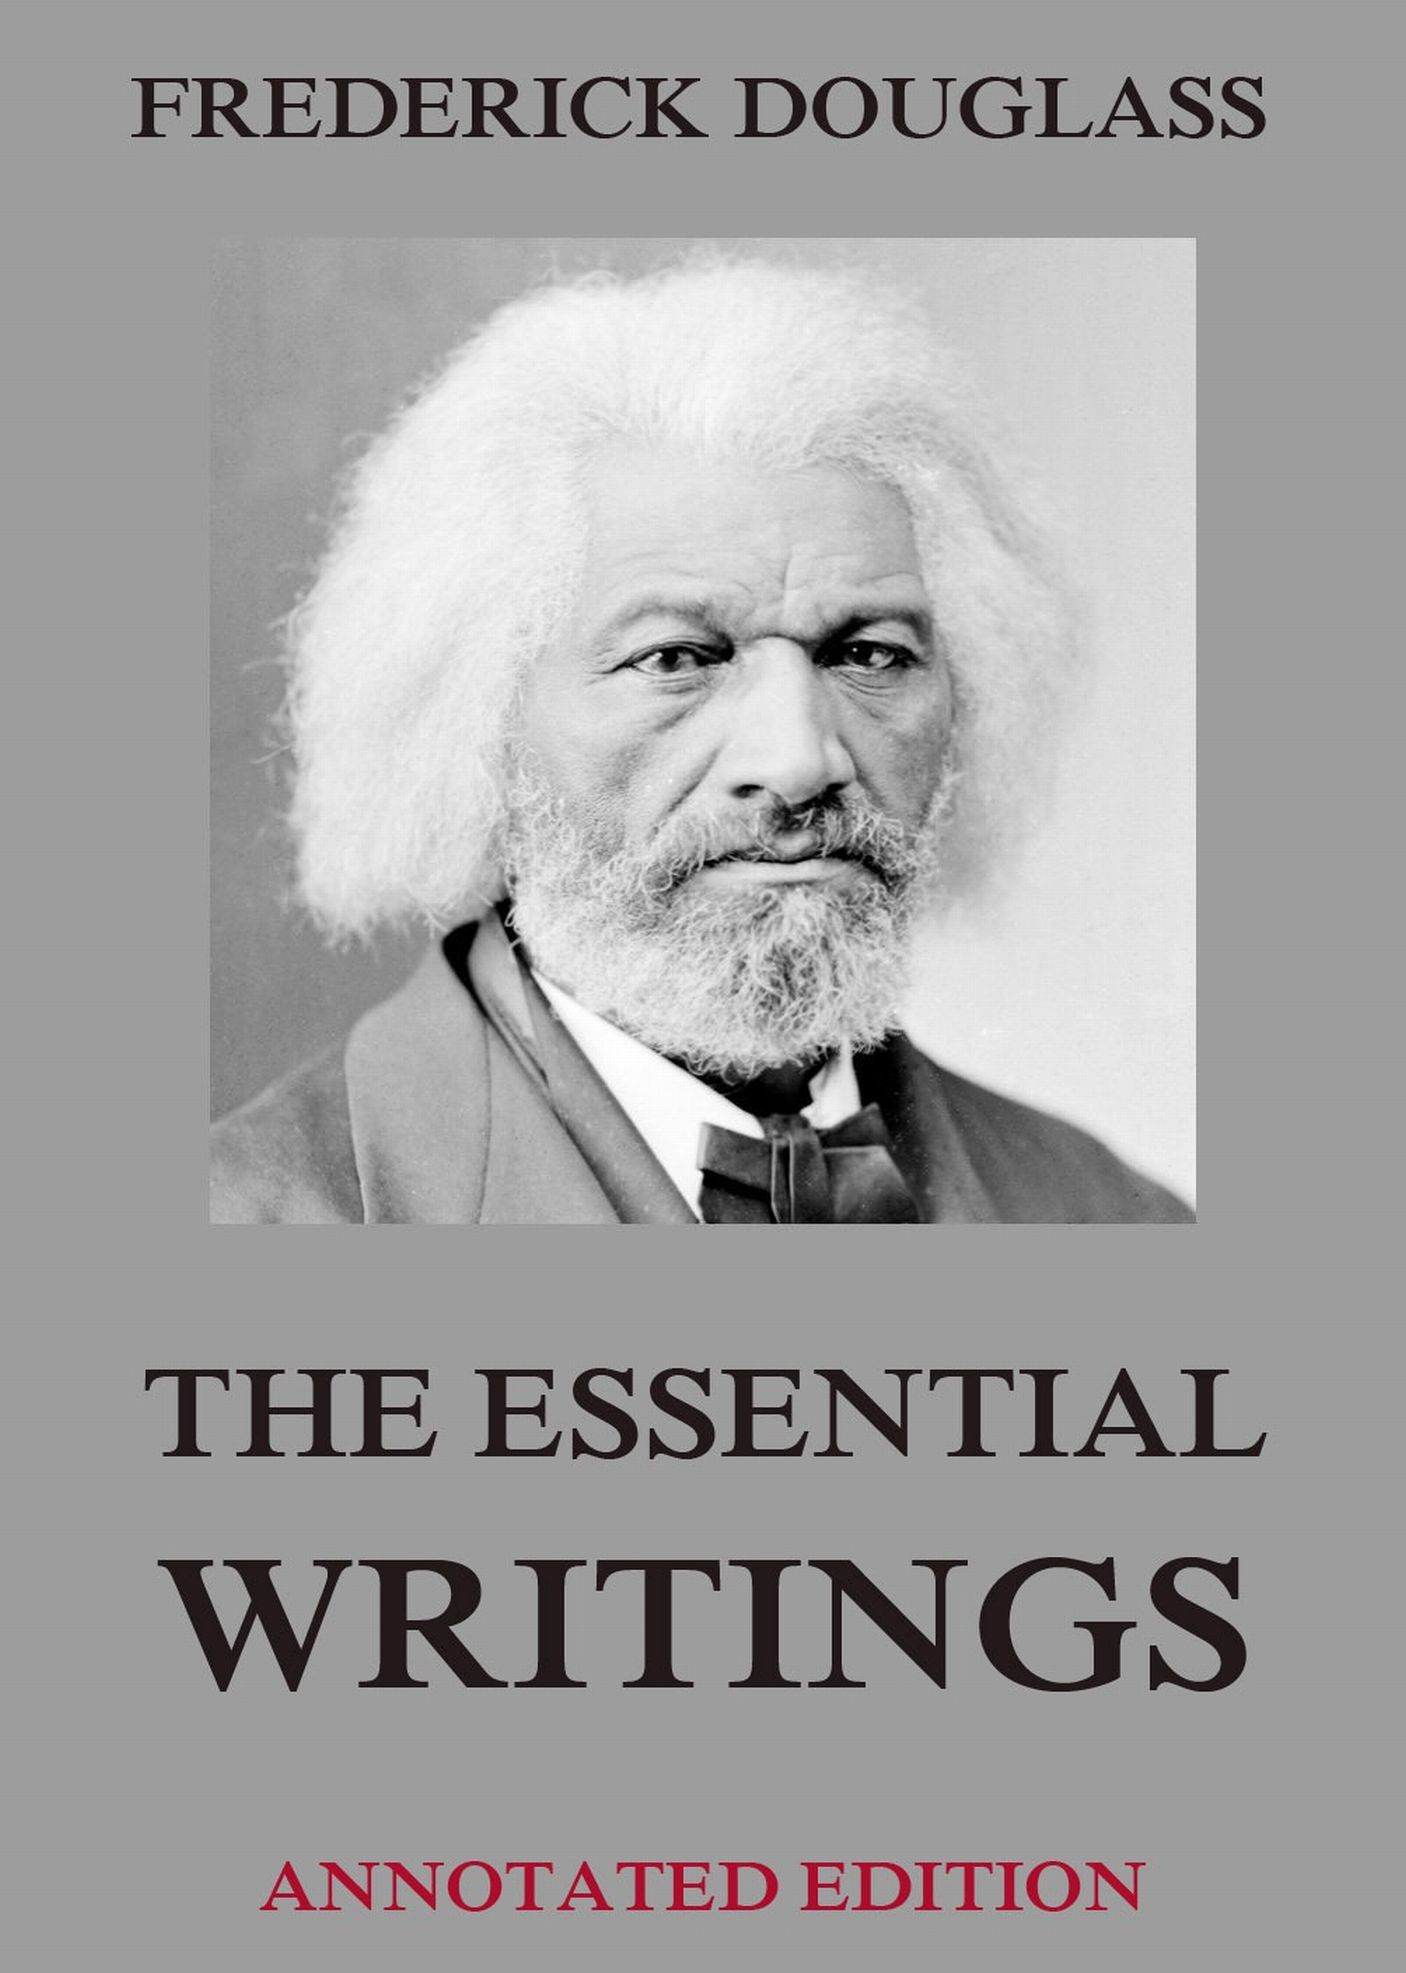 learning to read and write frederick douglass thesis